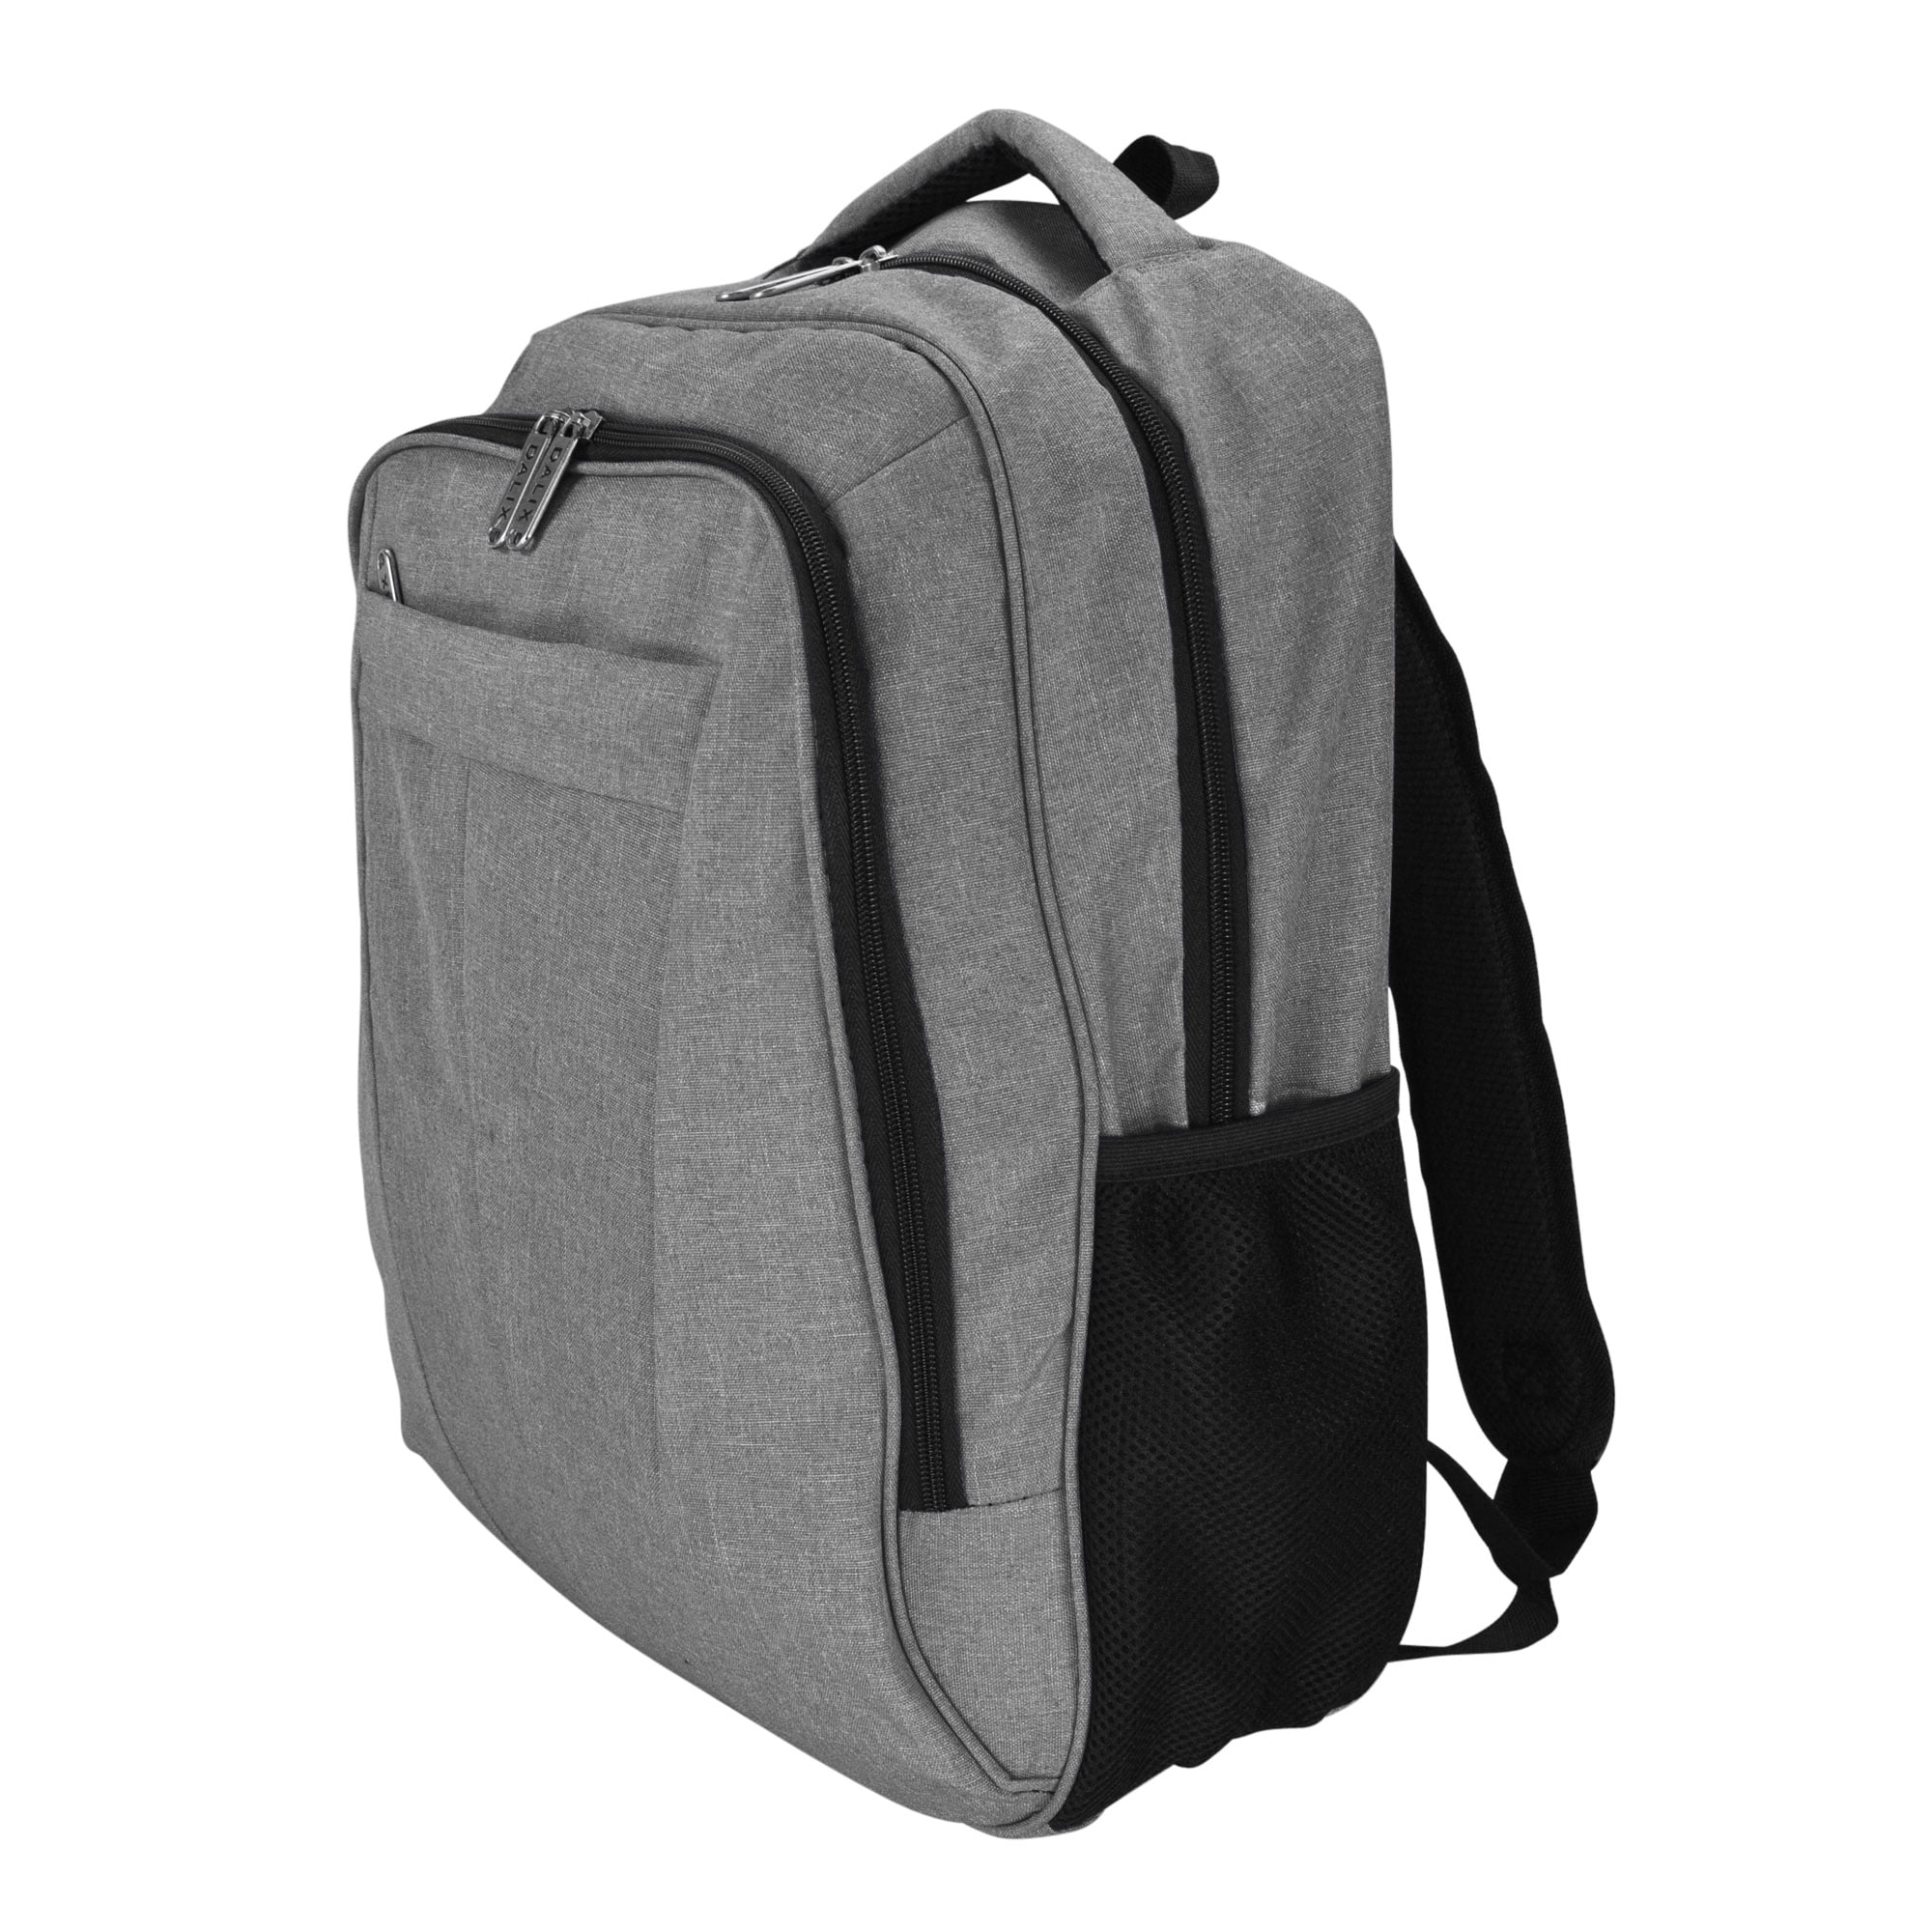 DALIX Extra Large Backpack with Multiple Pockets in Gray